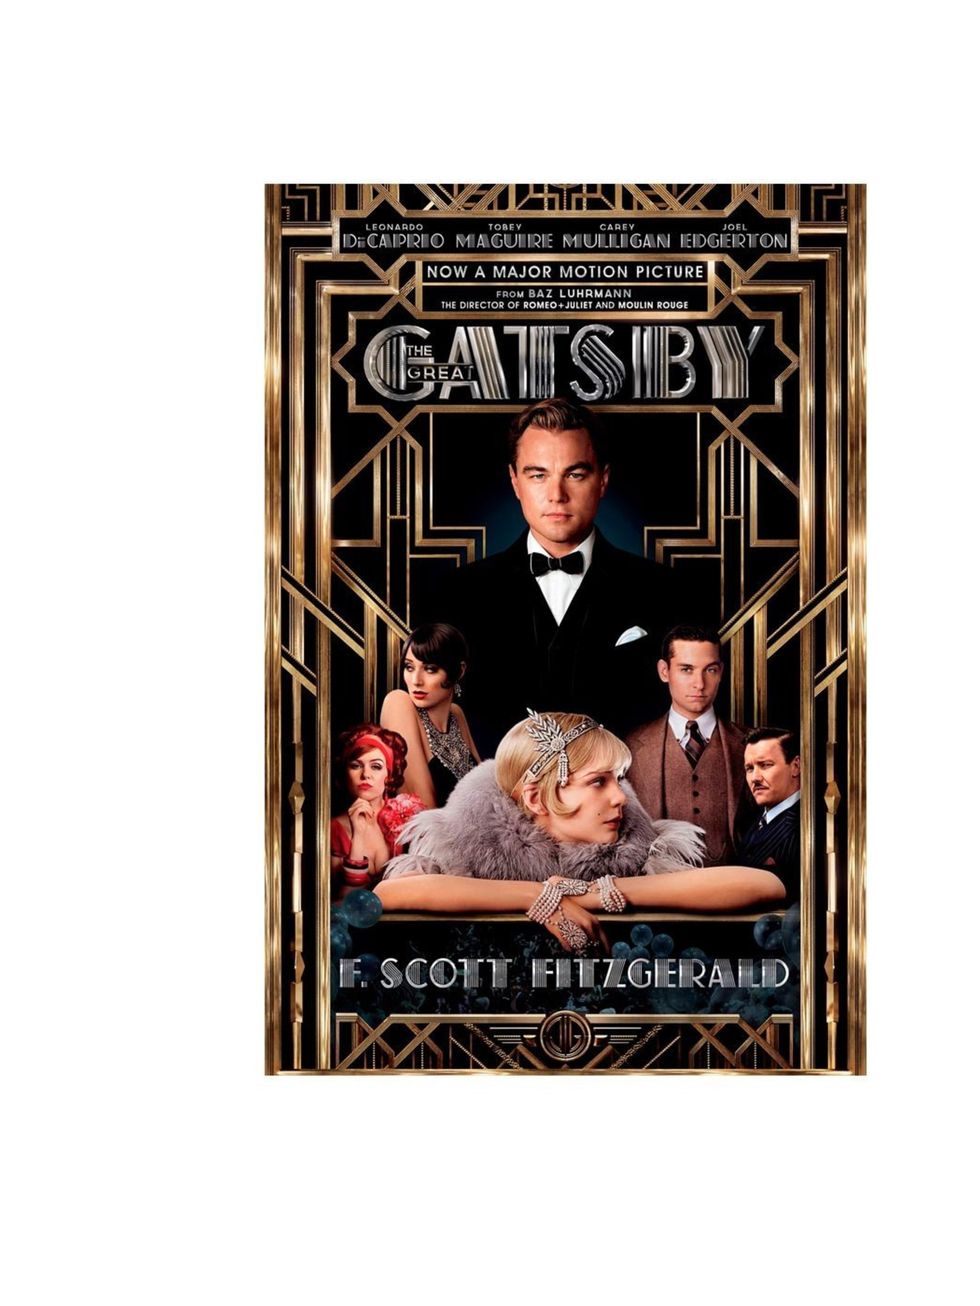 Great-Gatsby-Book-Cover-02-Sized